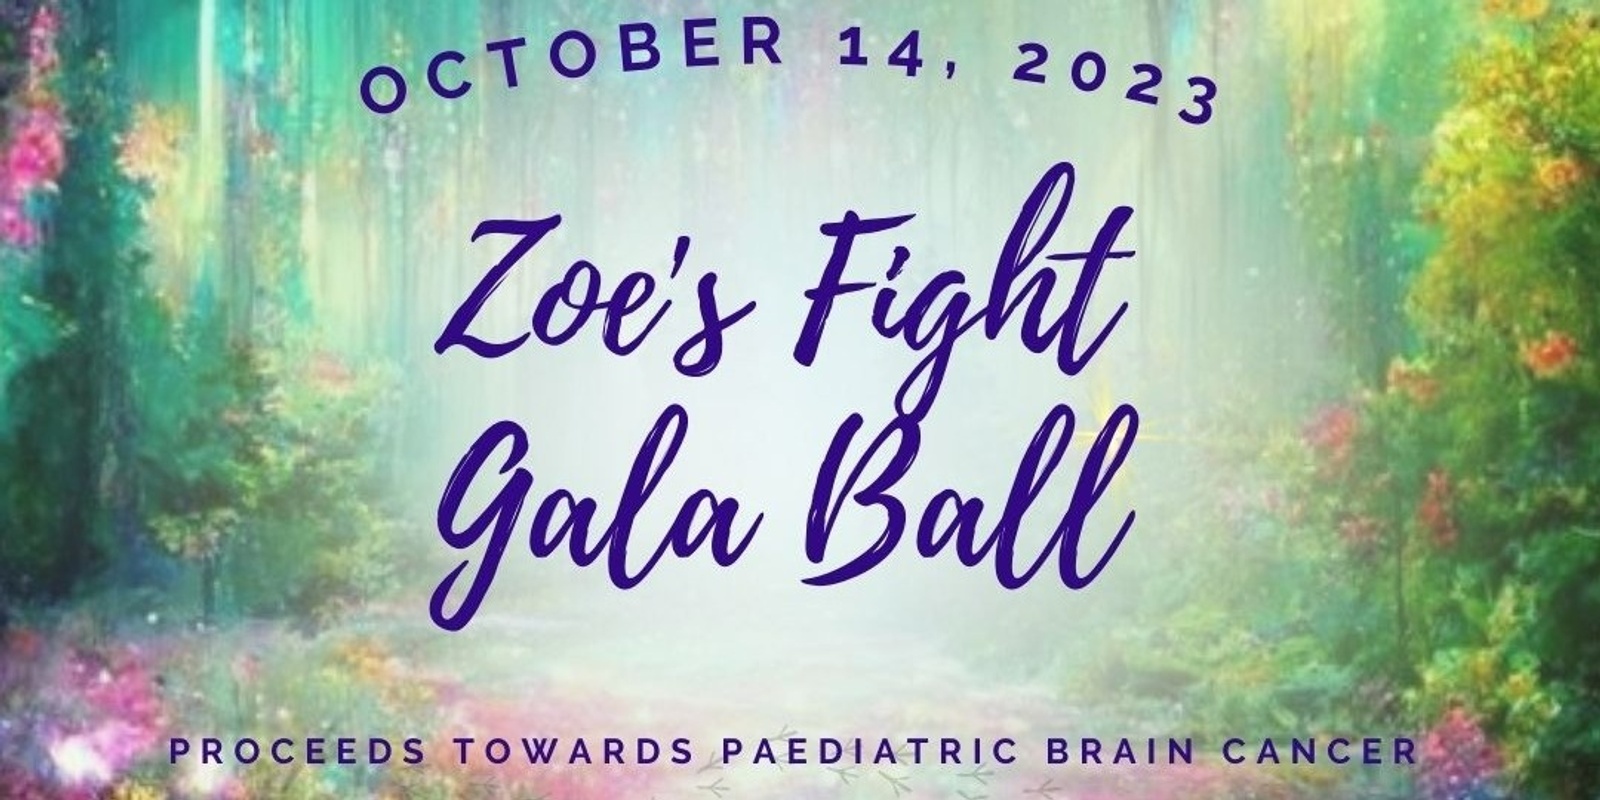 Banner image for Zoe’s Fight Gala Ball 